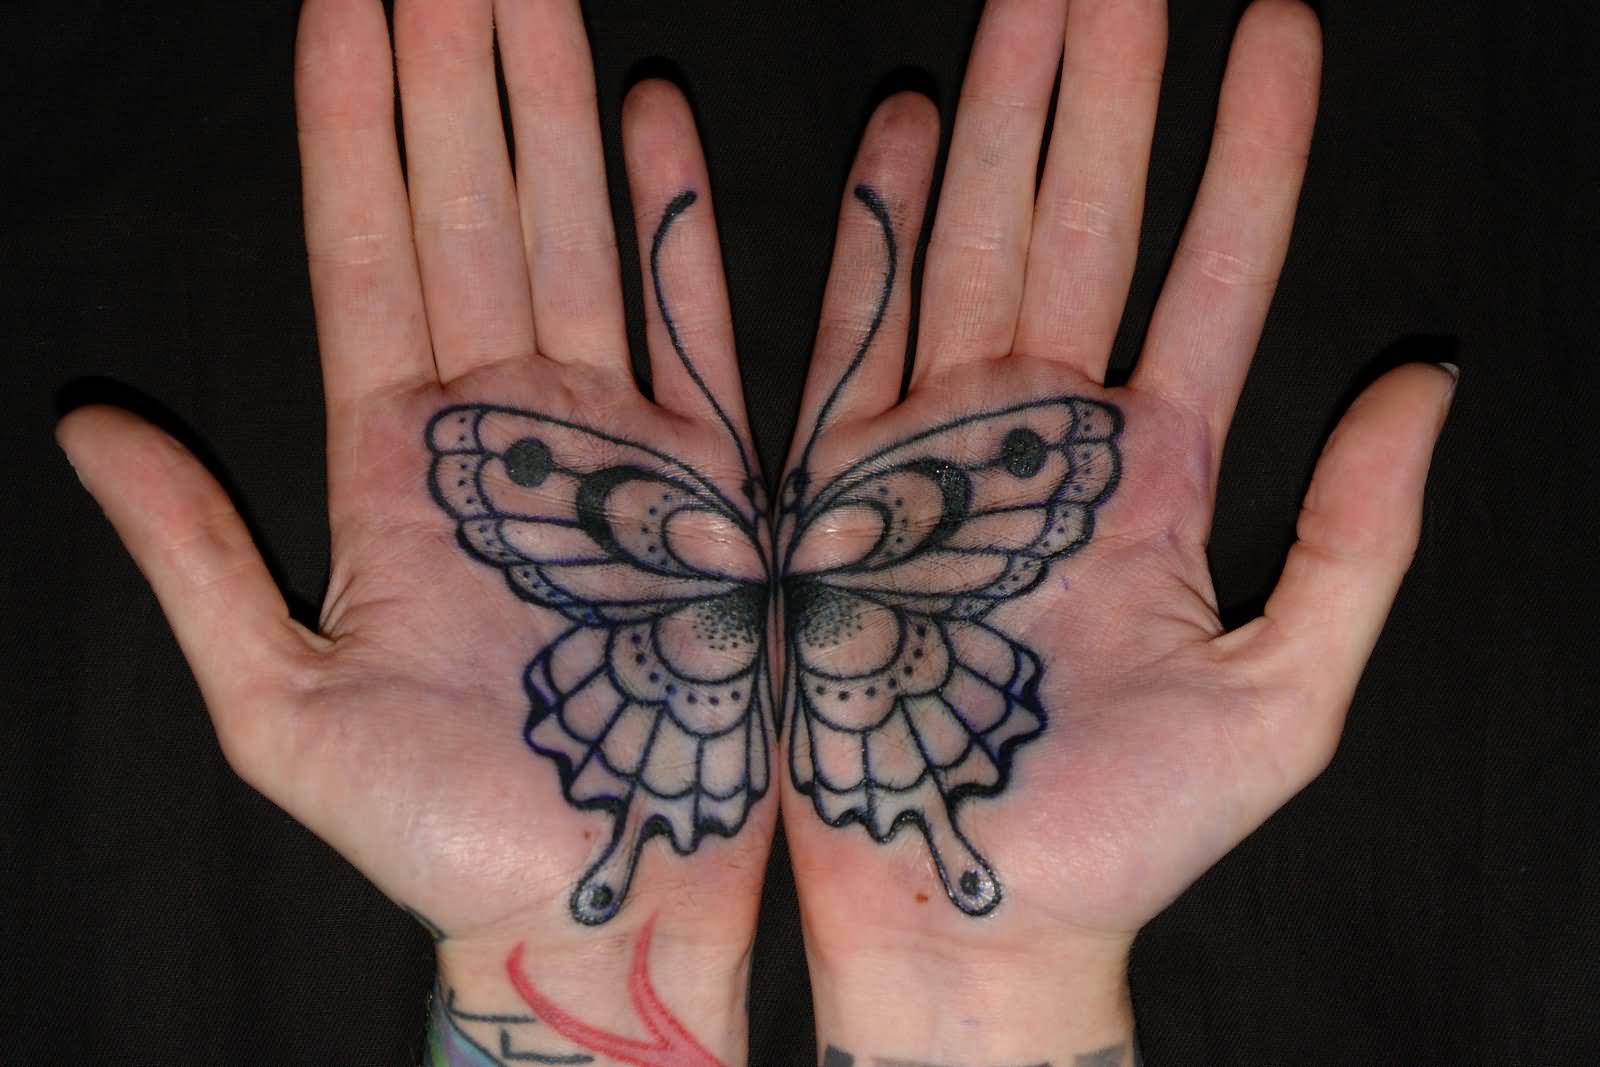 Black Ink Butterfly Tattoo On Both Hand Palm